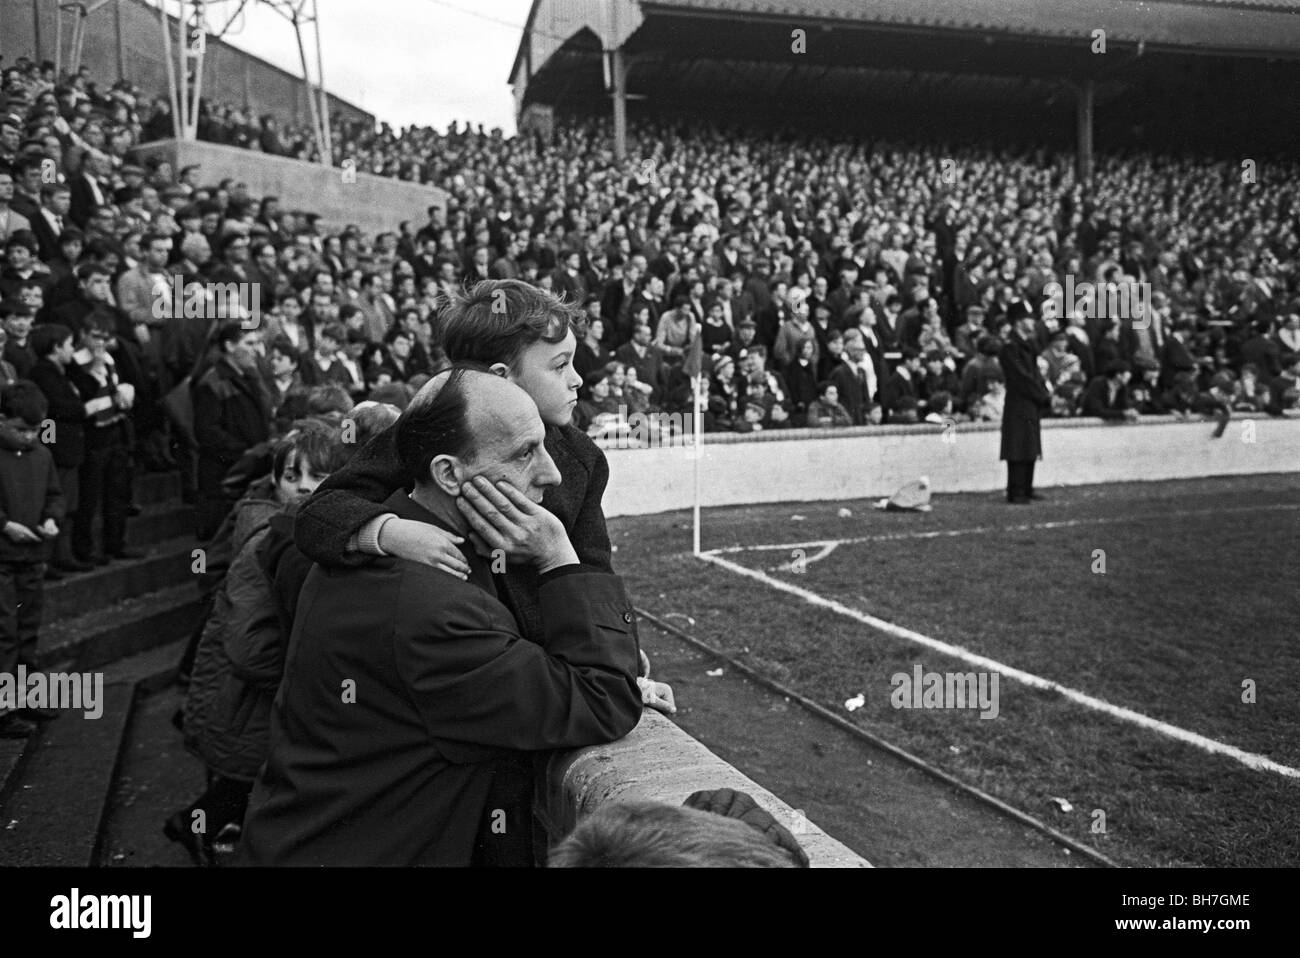 The crowd of fans at The Den that helped Millwall FC play 59 home games 1964-67 in a row without losses. Stock Photo